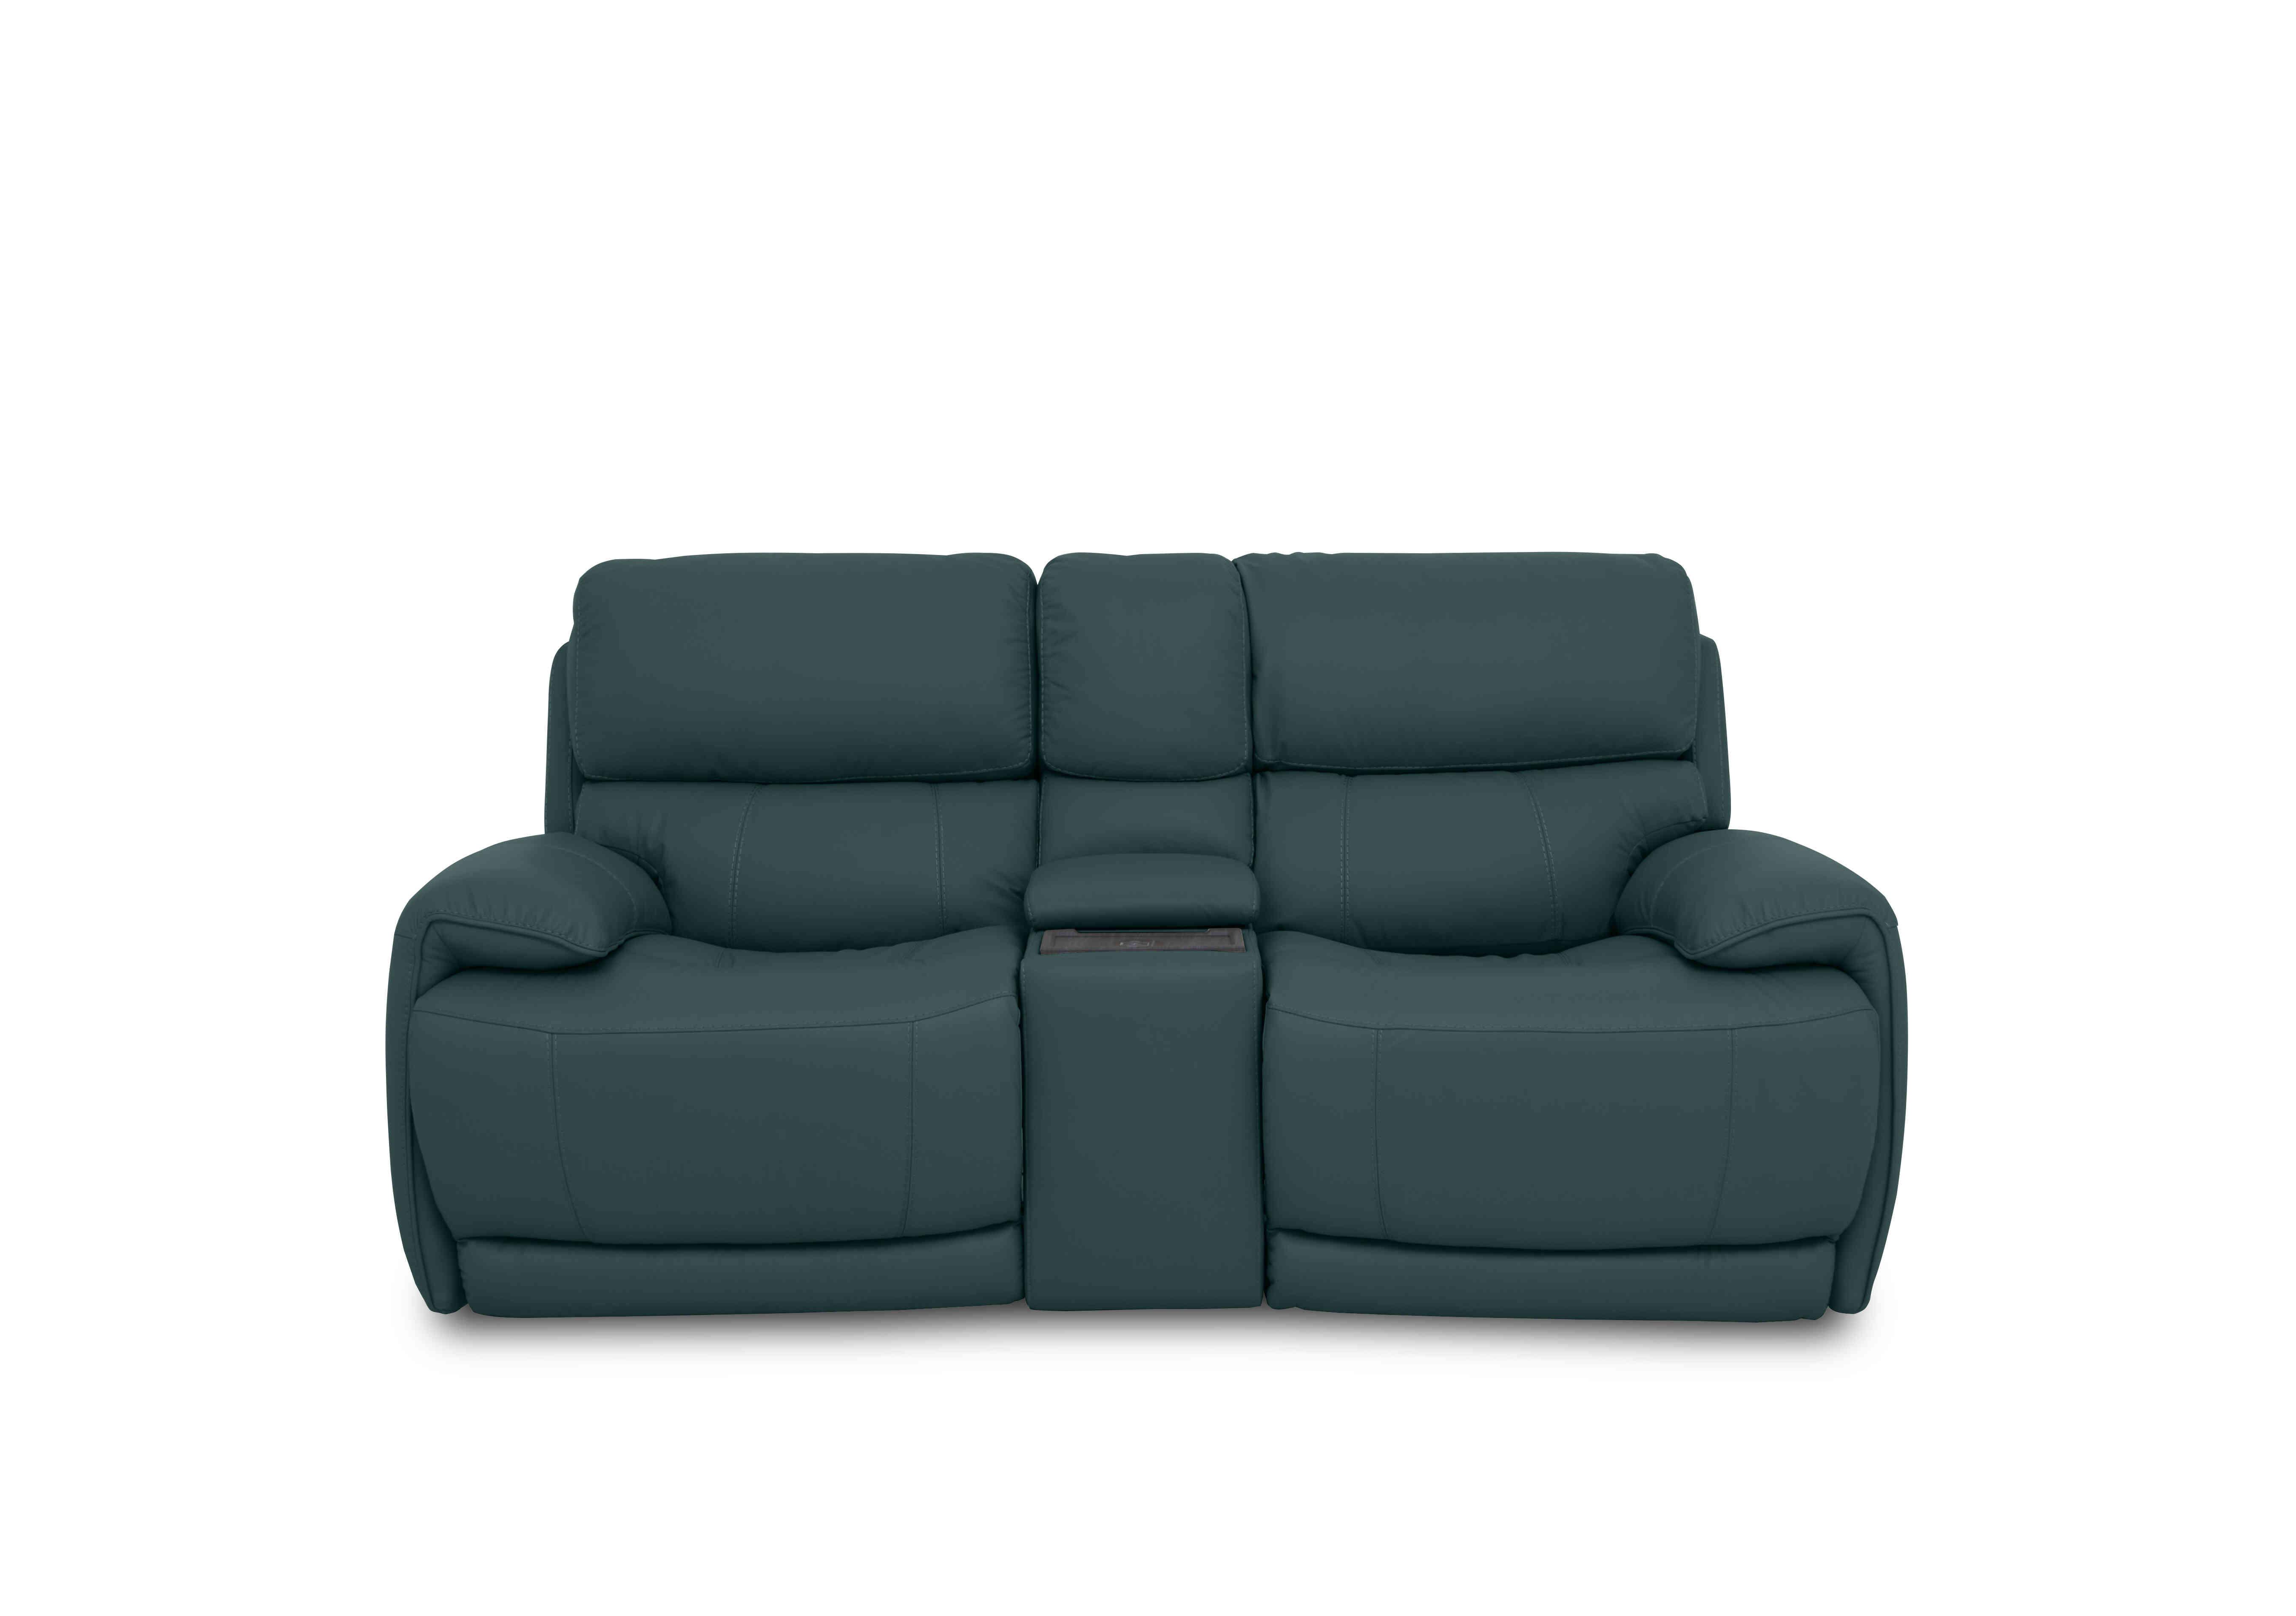 Rocco 2 Seater Leather Power Rocker Sofa with Cup Holders and Power Headrests in Bv-301e Lake Green on Furniture Village